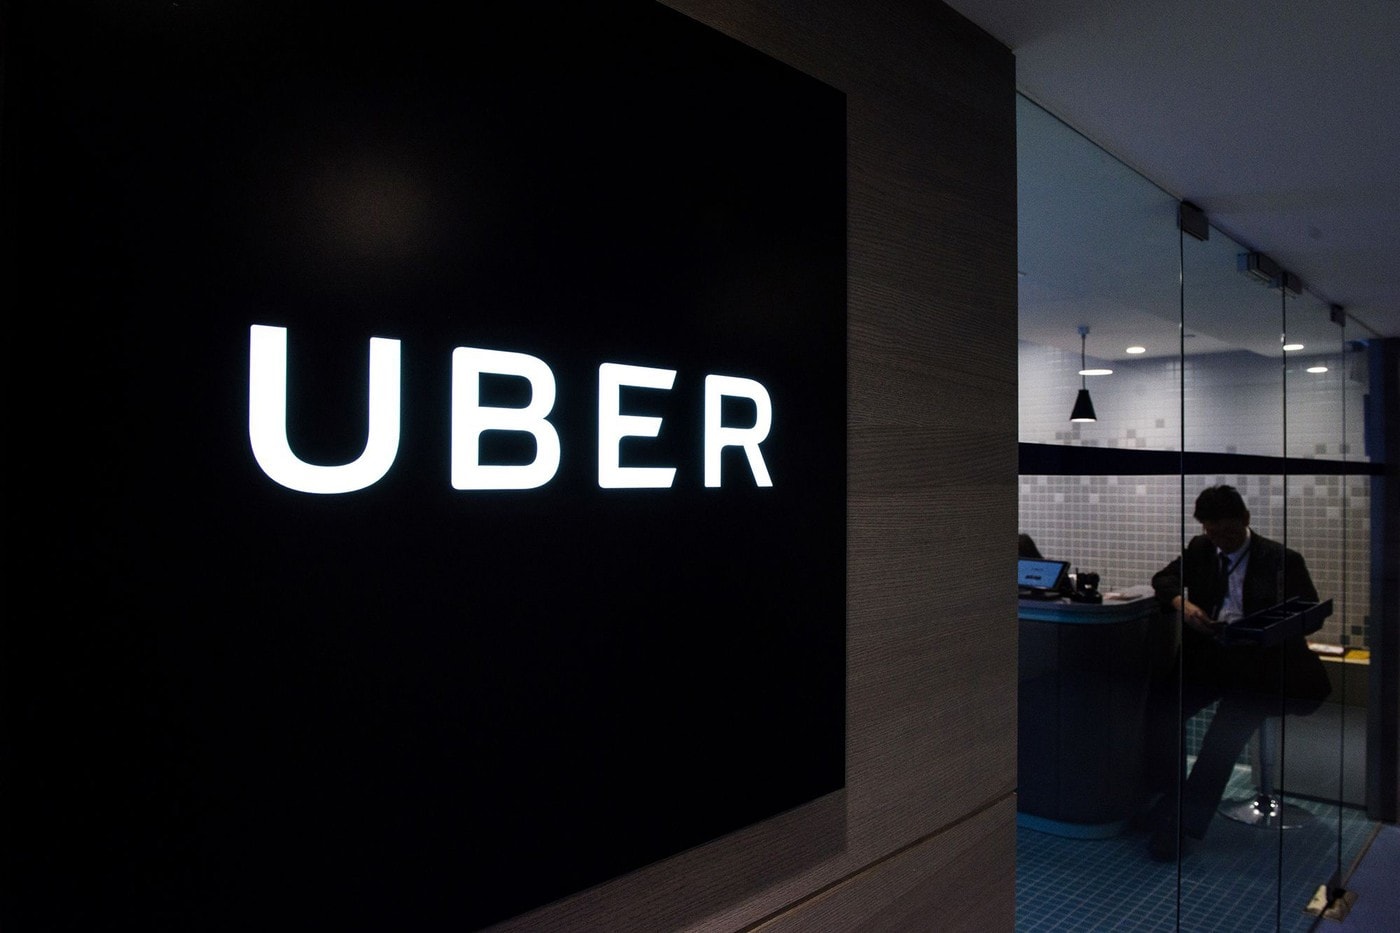 Uber Might Ban Riders With Low Ratings News Info ridesharing ride drivers taxi service tech giant technology smartphone app transportation travel 